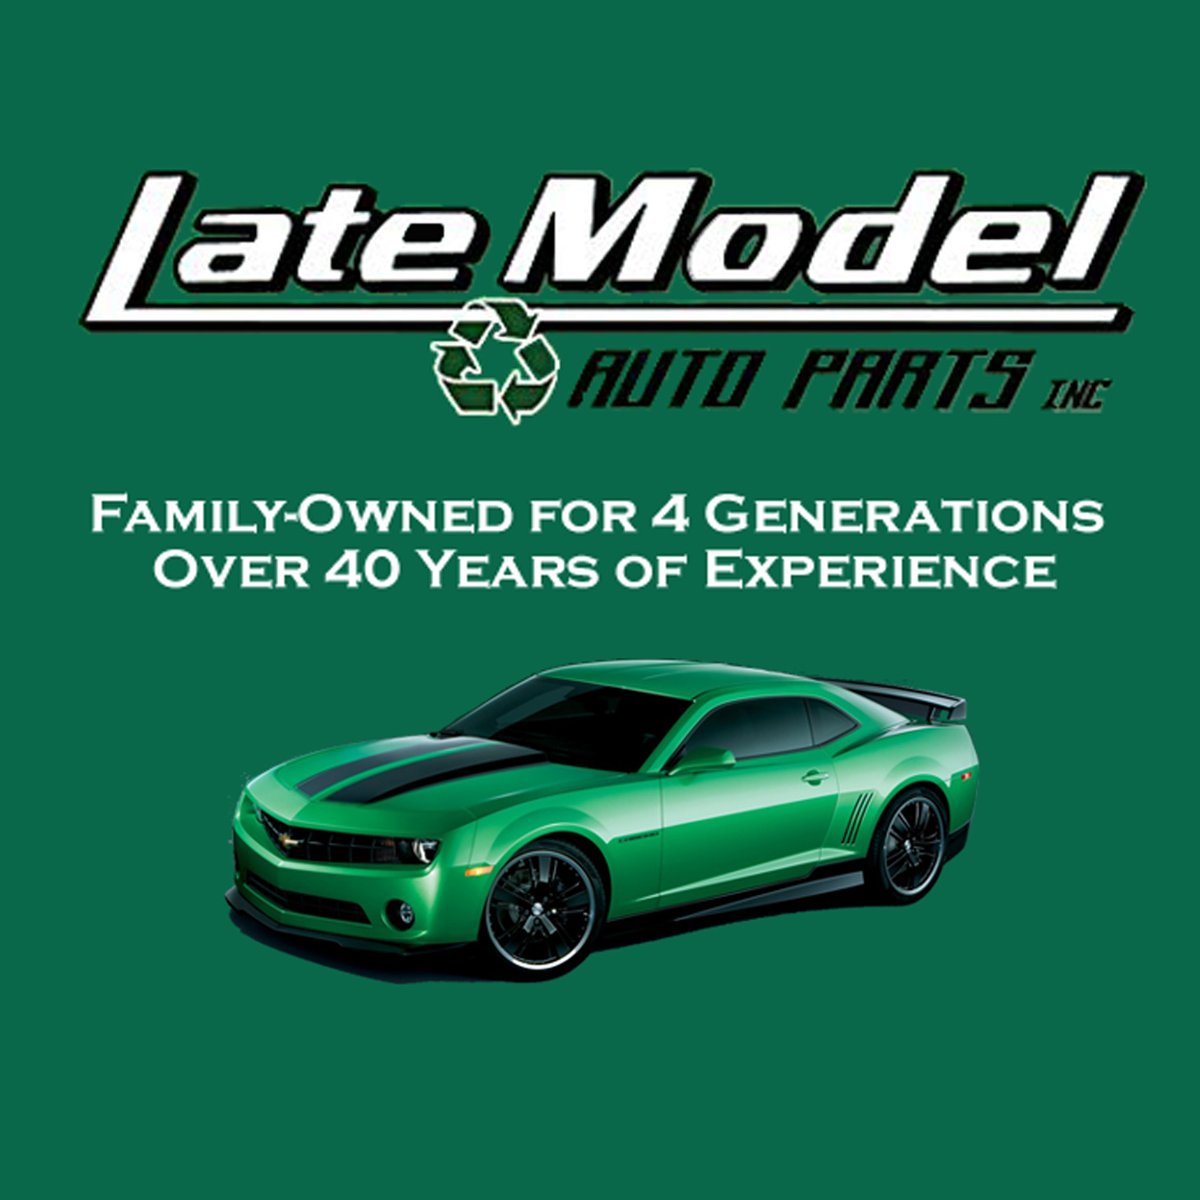 Search for used auto parts online! latemodelautoparts.com/part-search/ 

#LateModelAuto #LateModelAutoParts #KansasCity #LowPrices